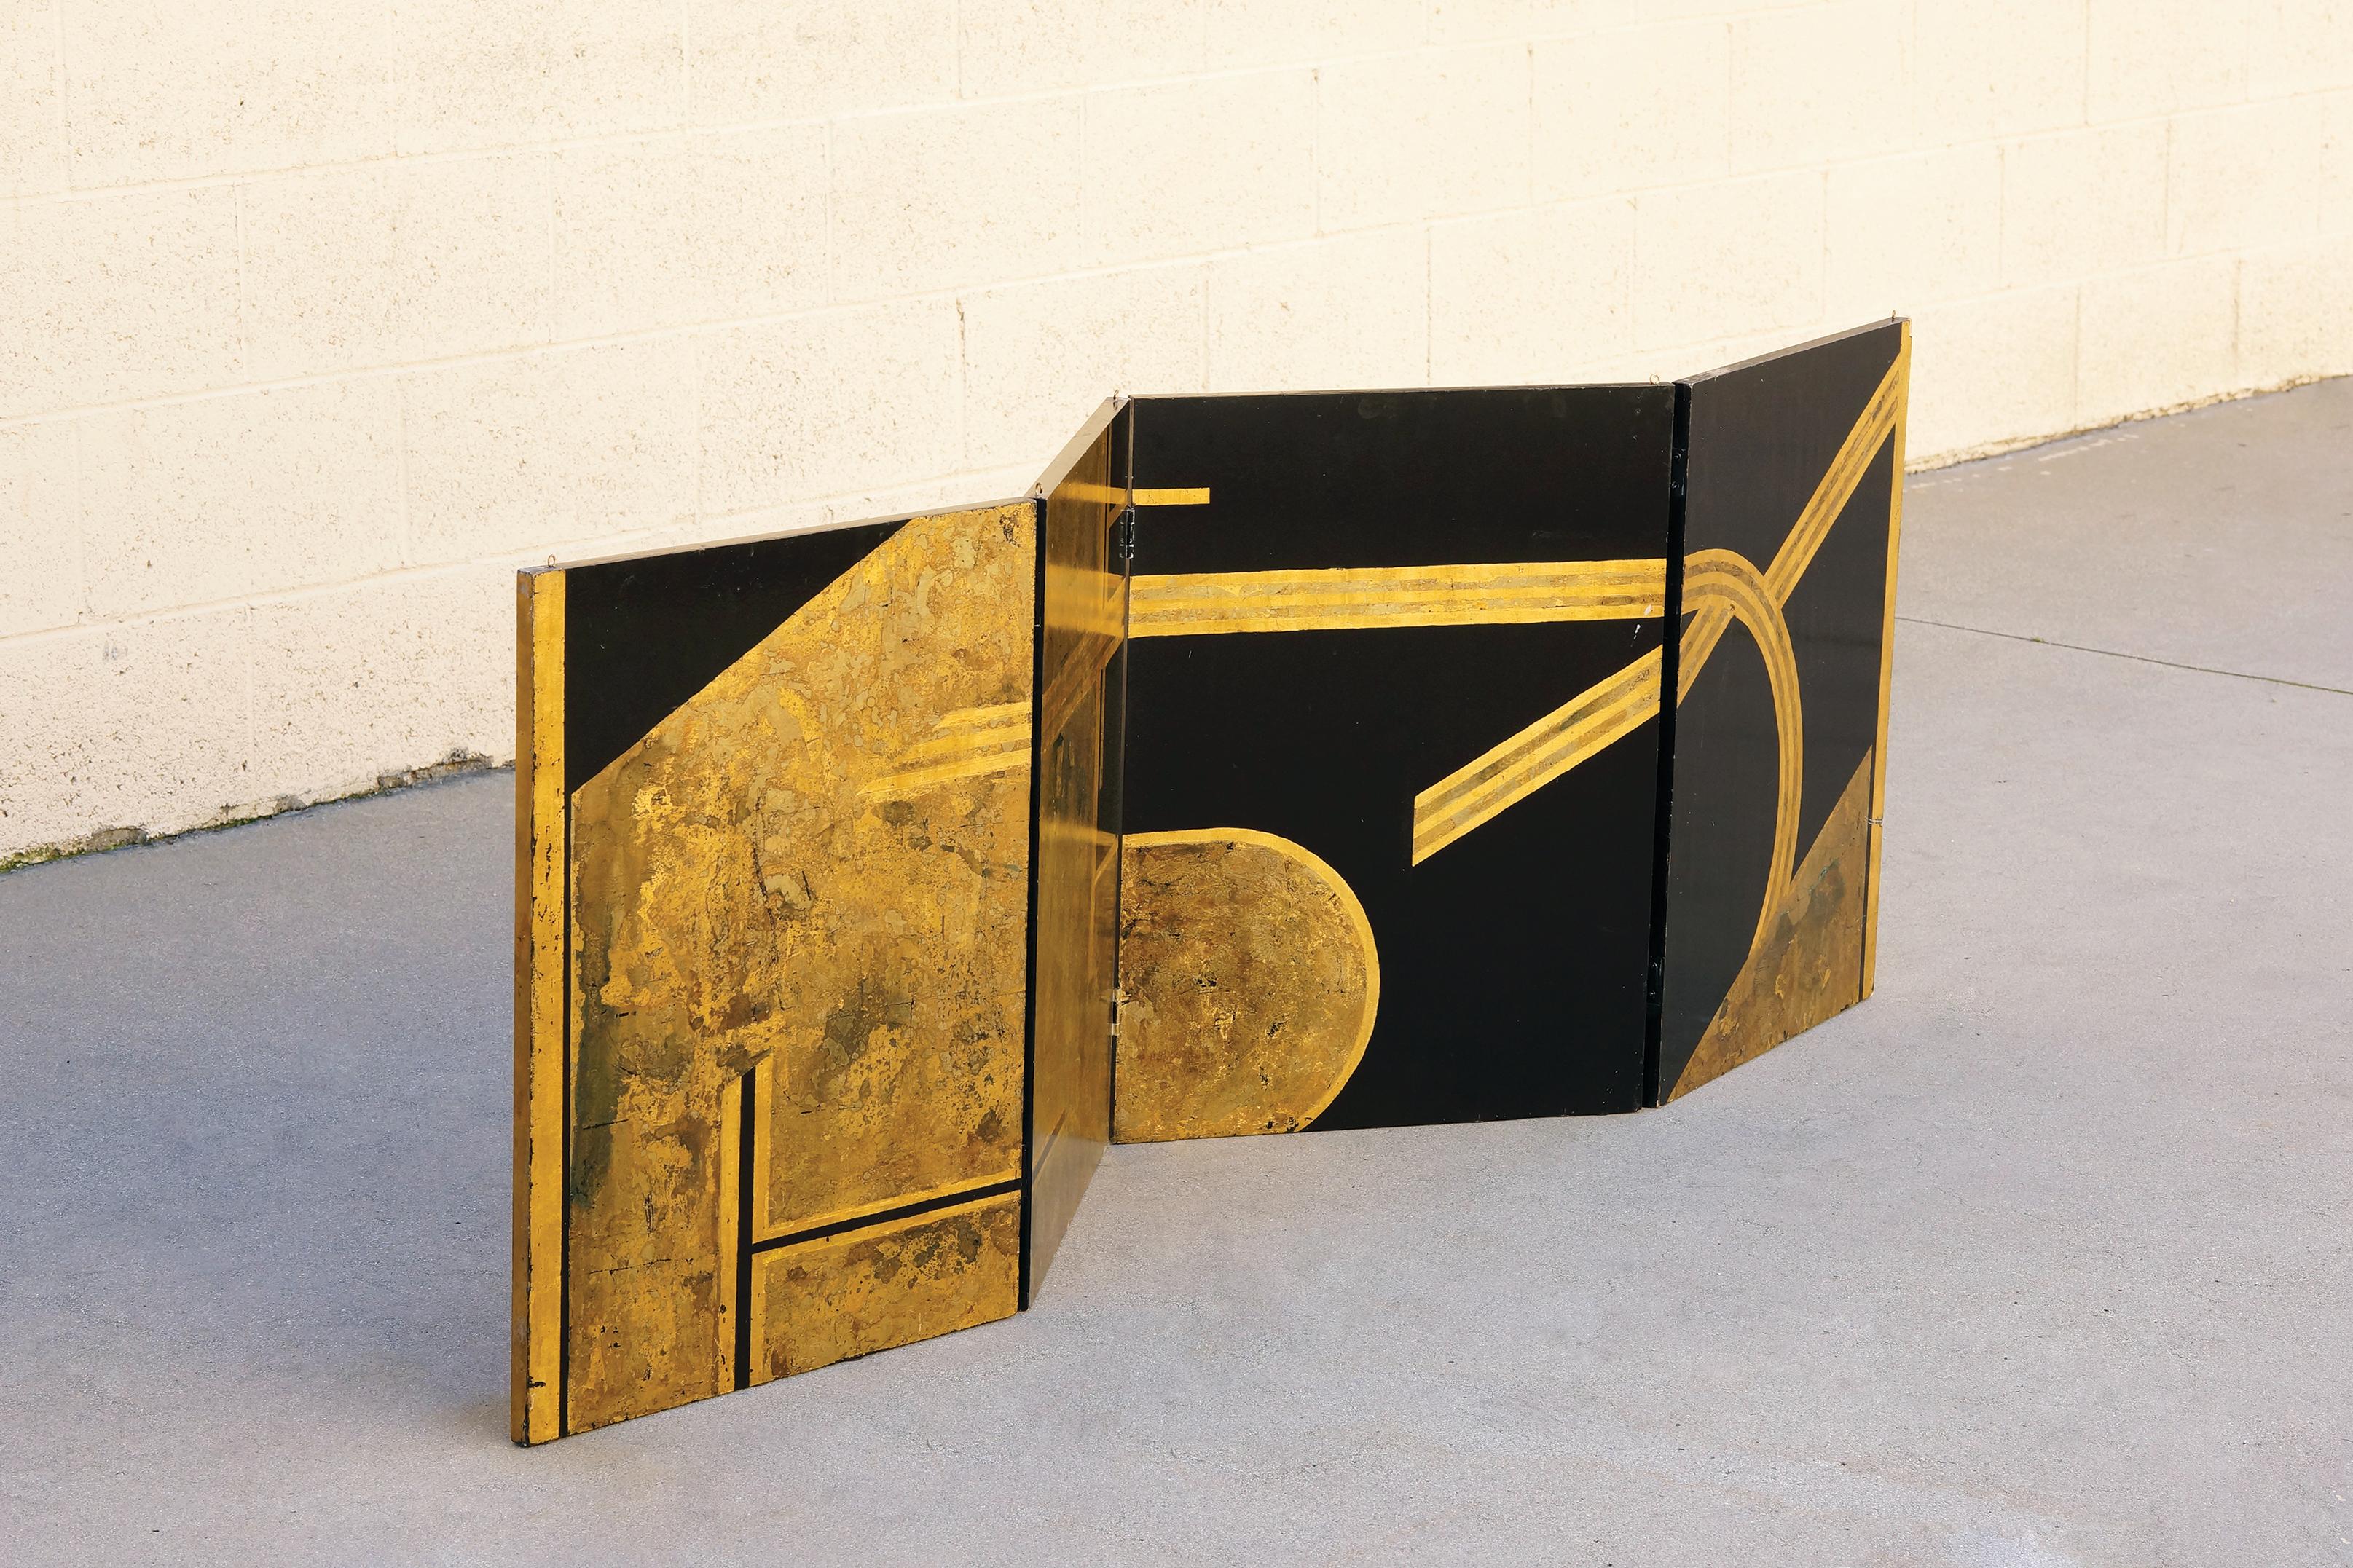 Original Art Deco era folding screen composed of gold leaf and black lacquer on wood panels. Four hinged panels in total comprise this 6ft piece. While it is constructed with hooks to be mounted from the ceiling, it can be utilized in a number of